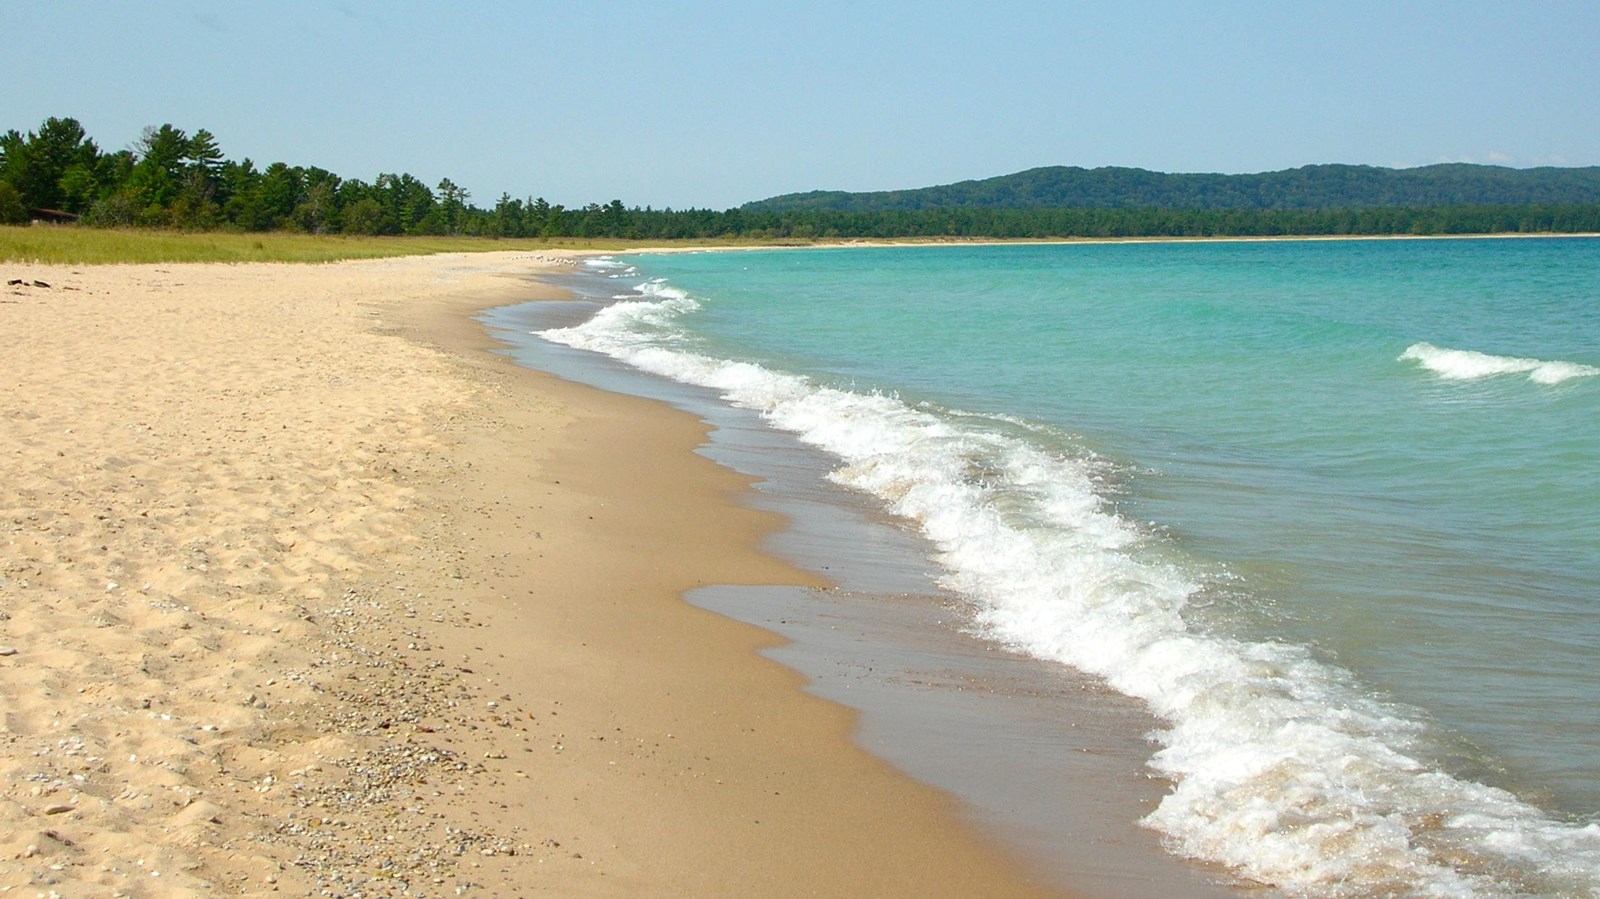 A white-tipped turquoise wave rolls on a golden sand beach